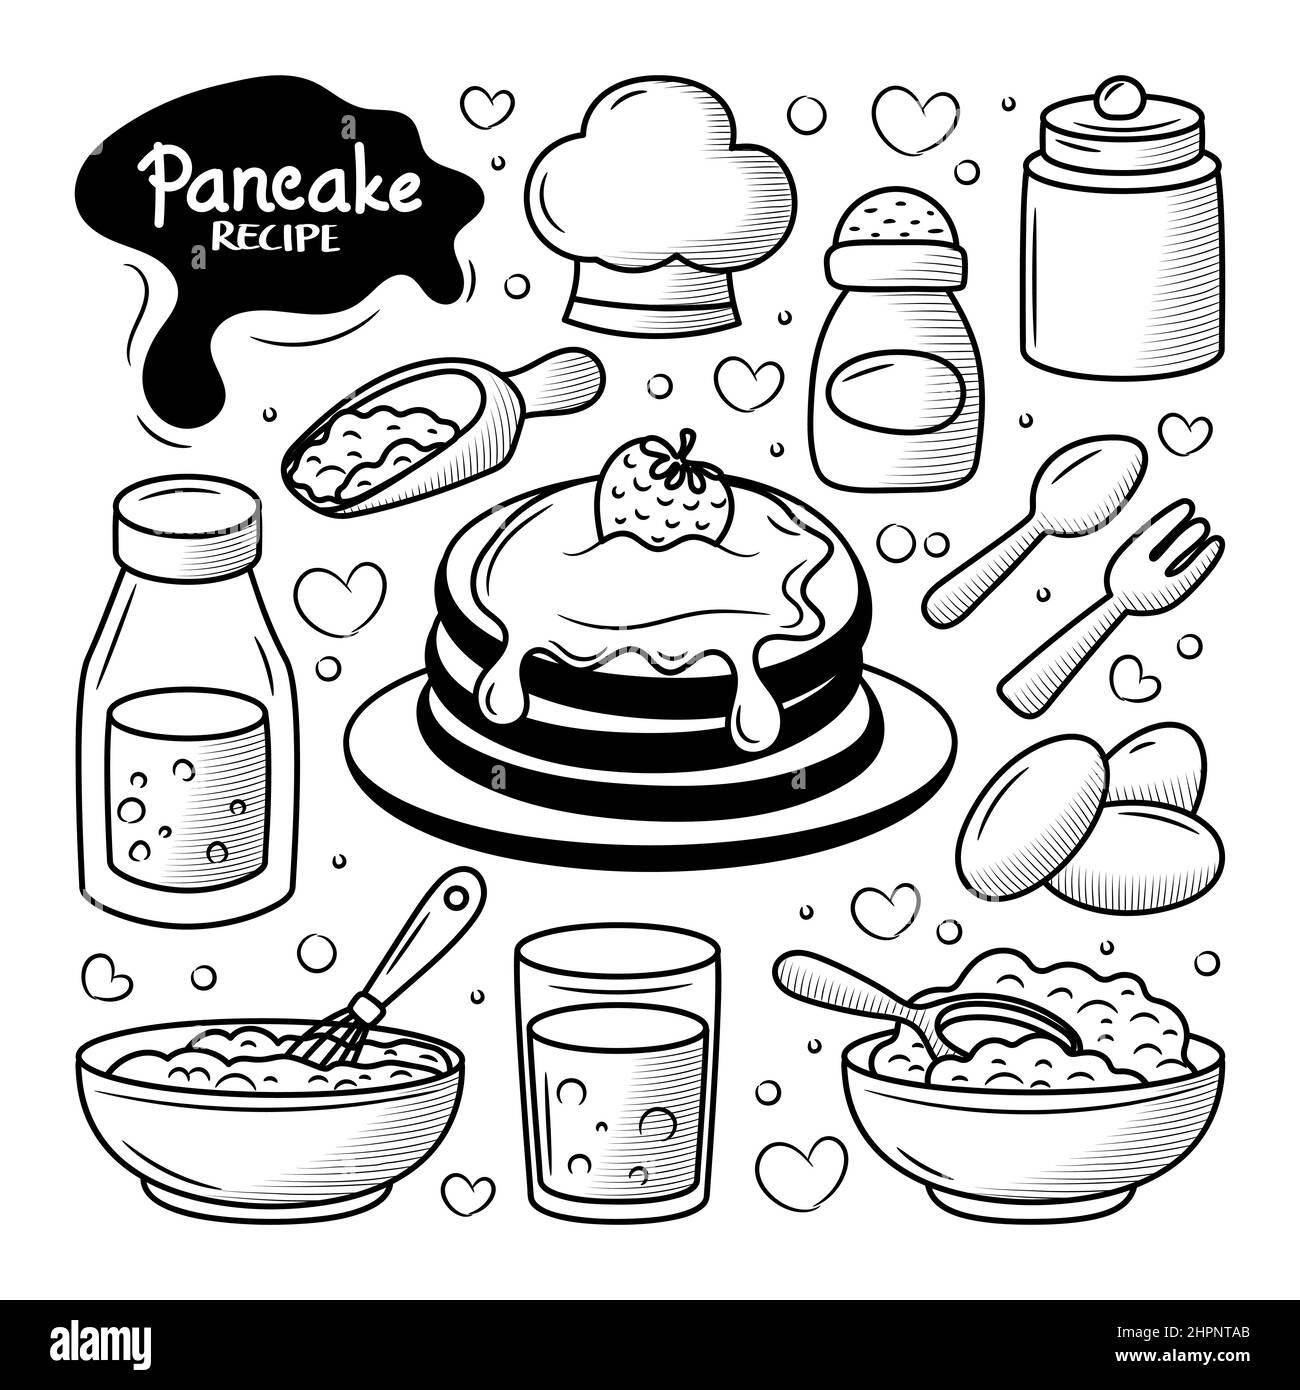 Pancake recipe with hand drawn doodle element Stock Vector